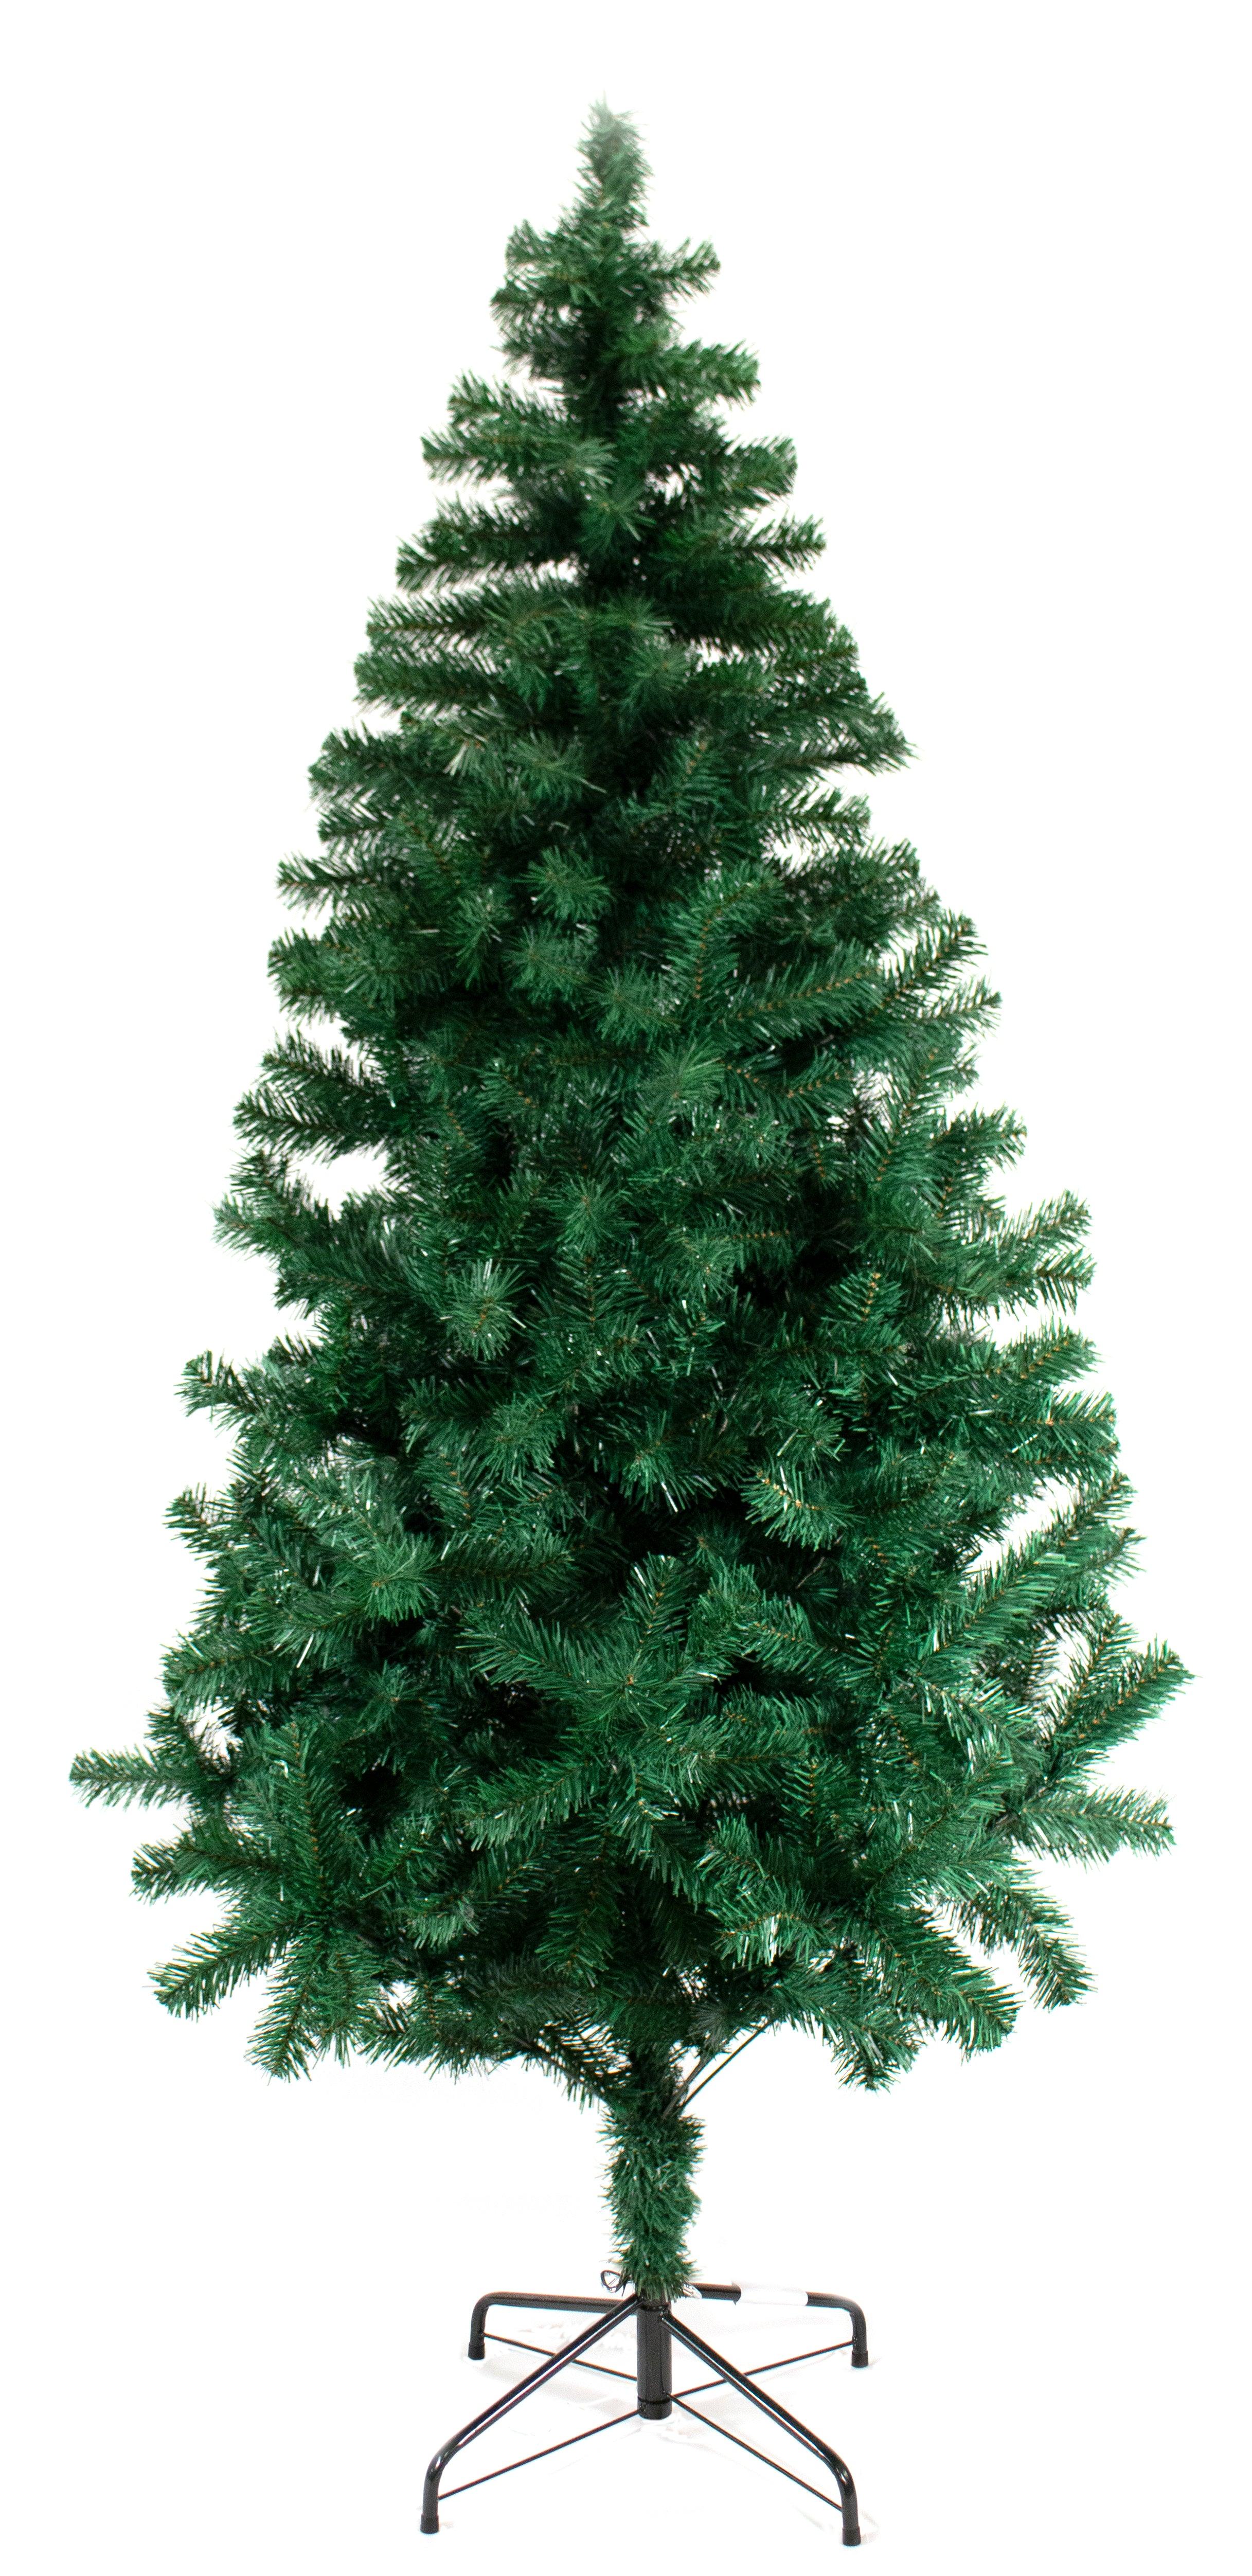 Scotts Pine Artificial Christmas Tree 6ft / 180cm - General Hardware Supplies Homevalue